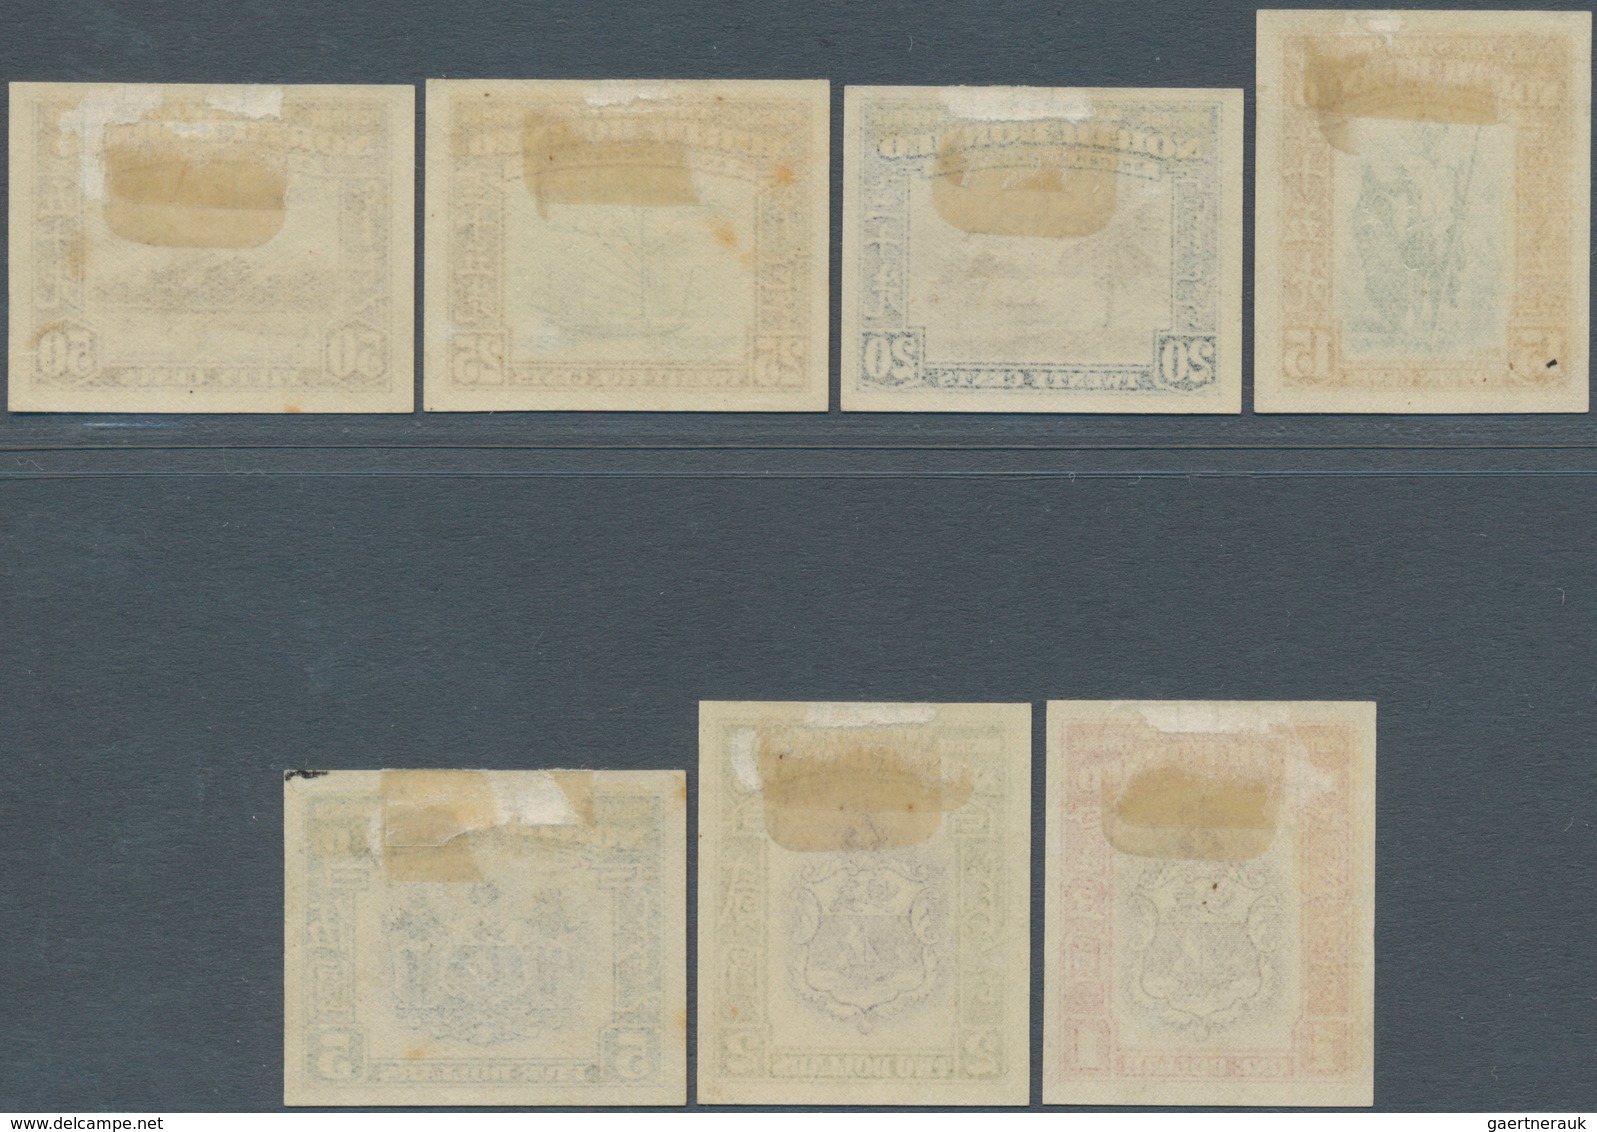 07563 Nordborneo: 1939, Pictorial And Coat Of Arms Definitives Complete Set Of 15 In IMPERFORATE PROOFS In - North Borneo (...-1963)